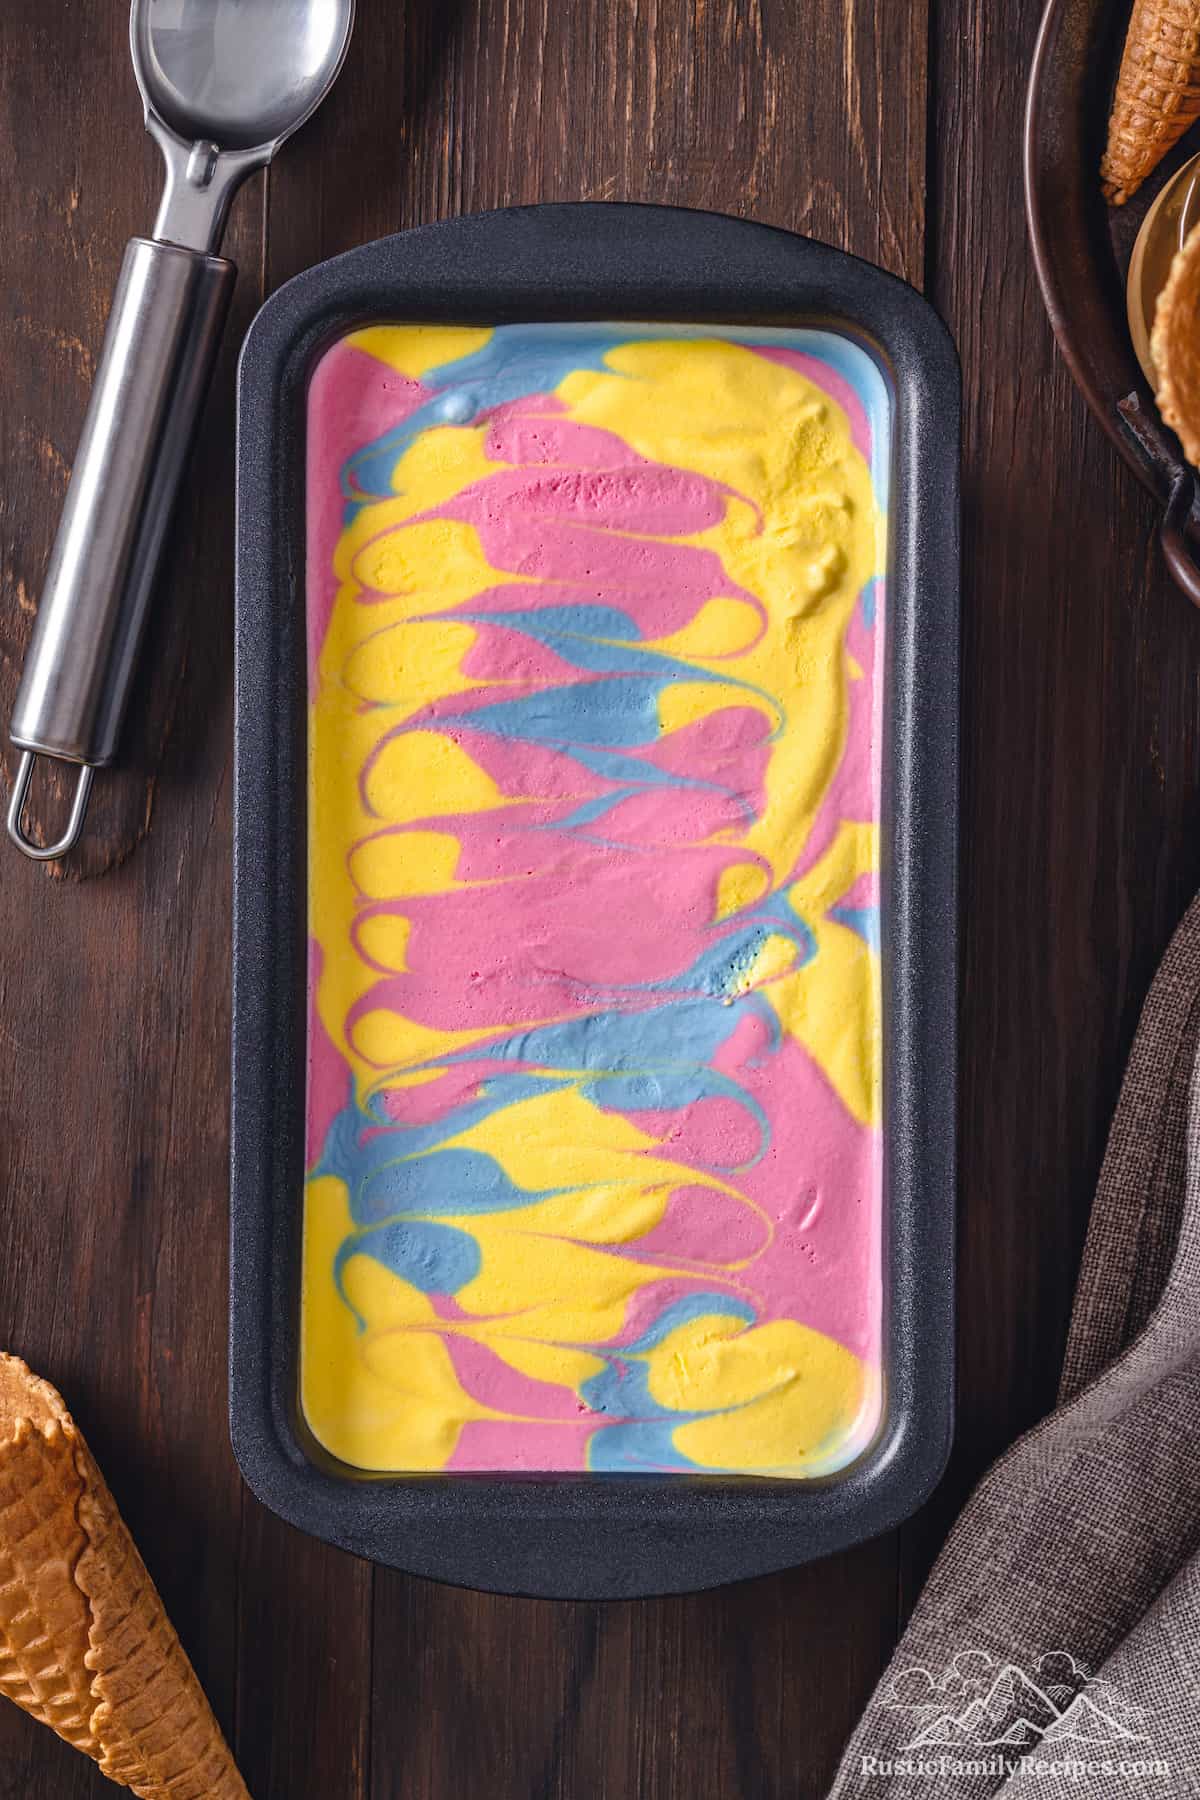 Top view of Superman ice cream swirled inside a loaf pan.